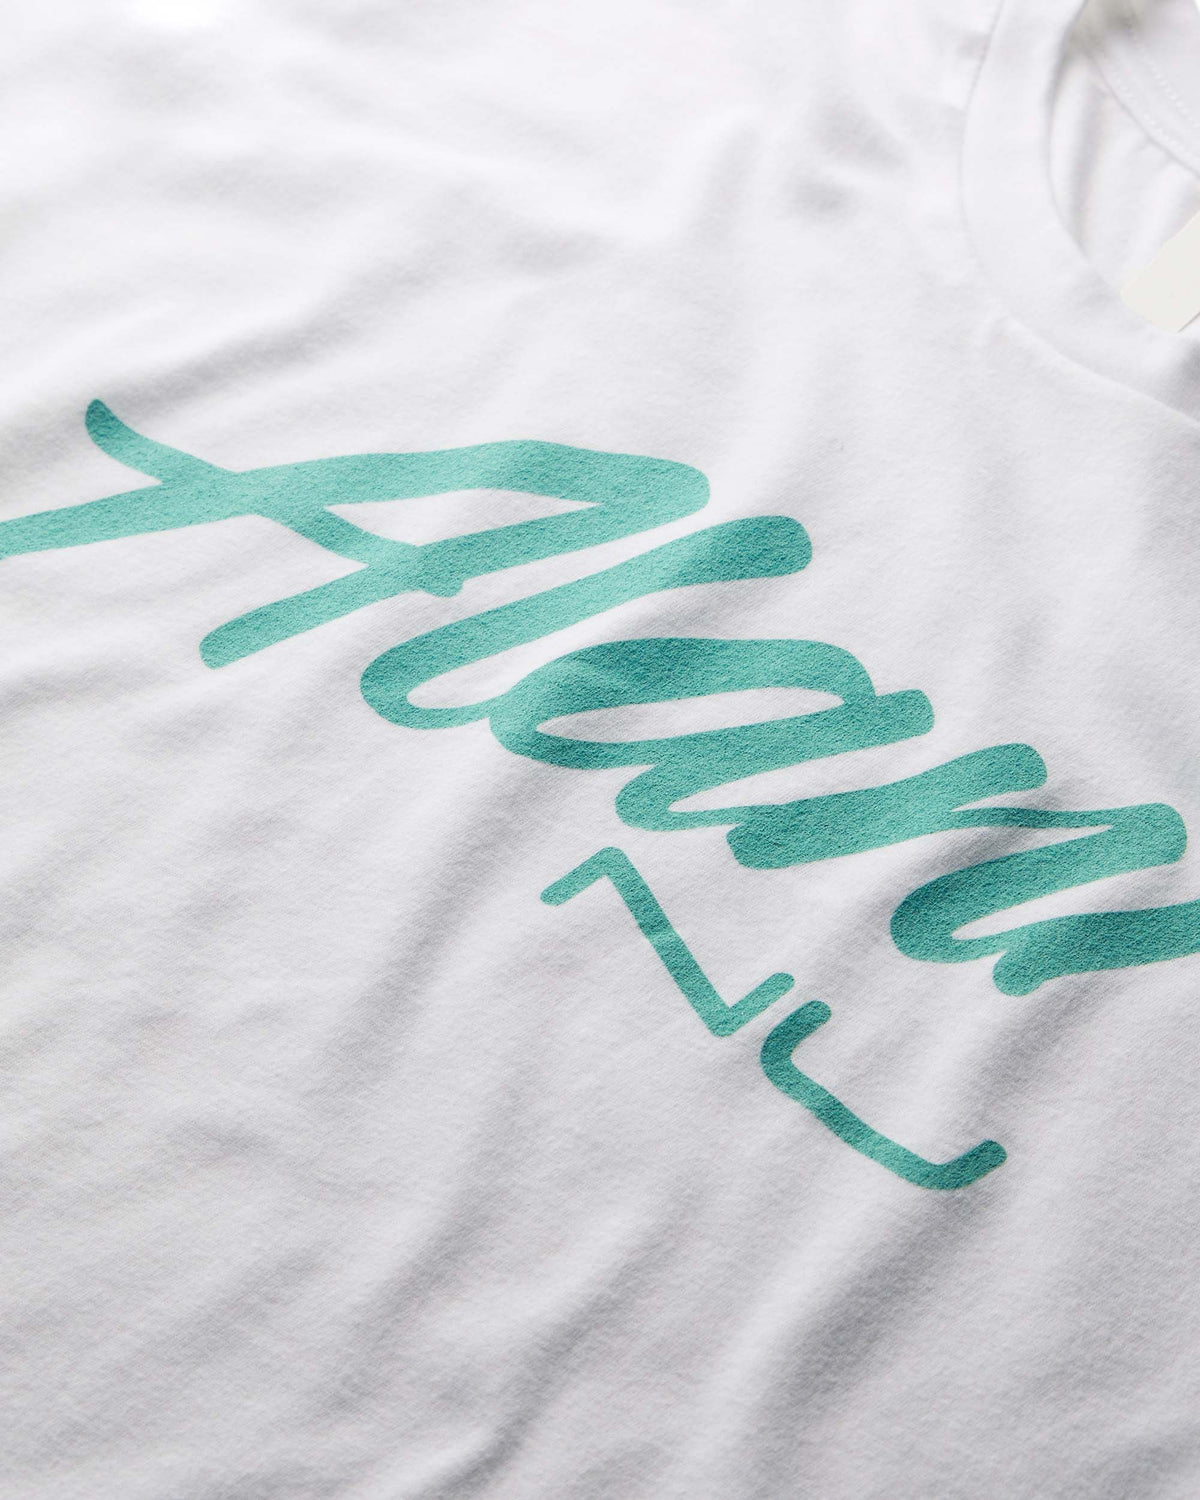 A Seafoam On White T-Shirt with green lettering on it.